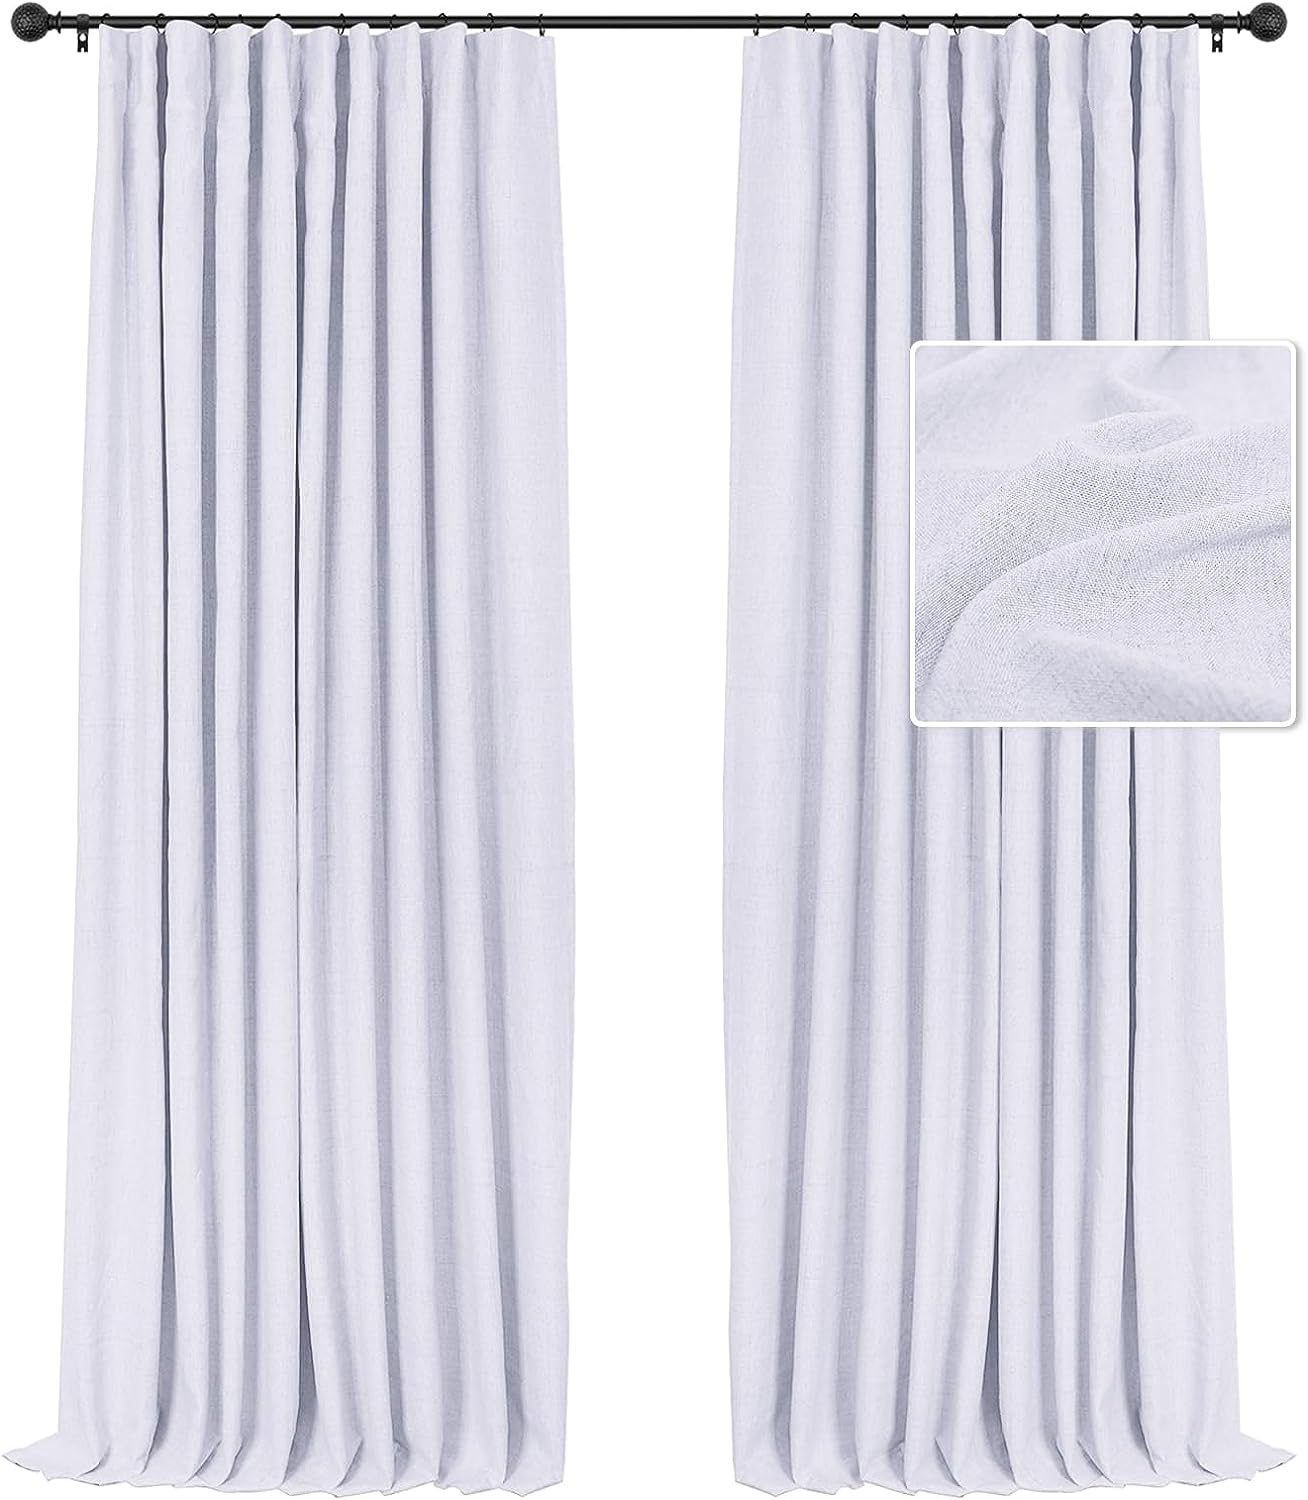 INOVADAY Blackout Curtains, 2-Panel Linen Textured [...]